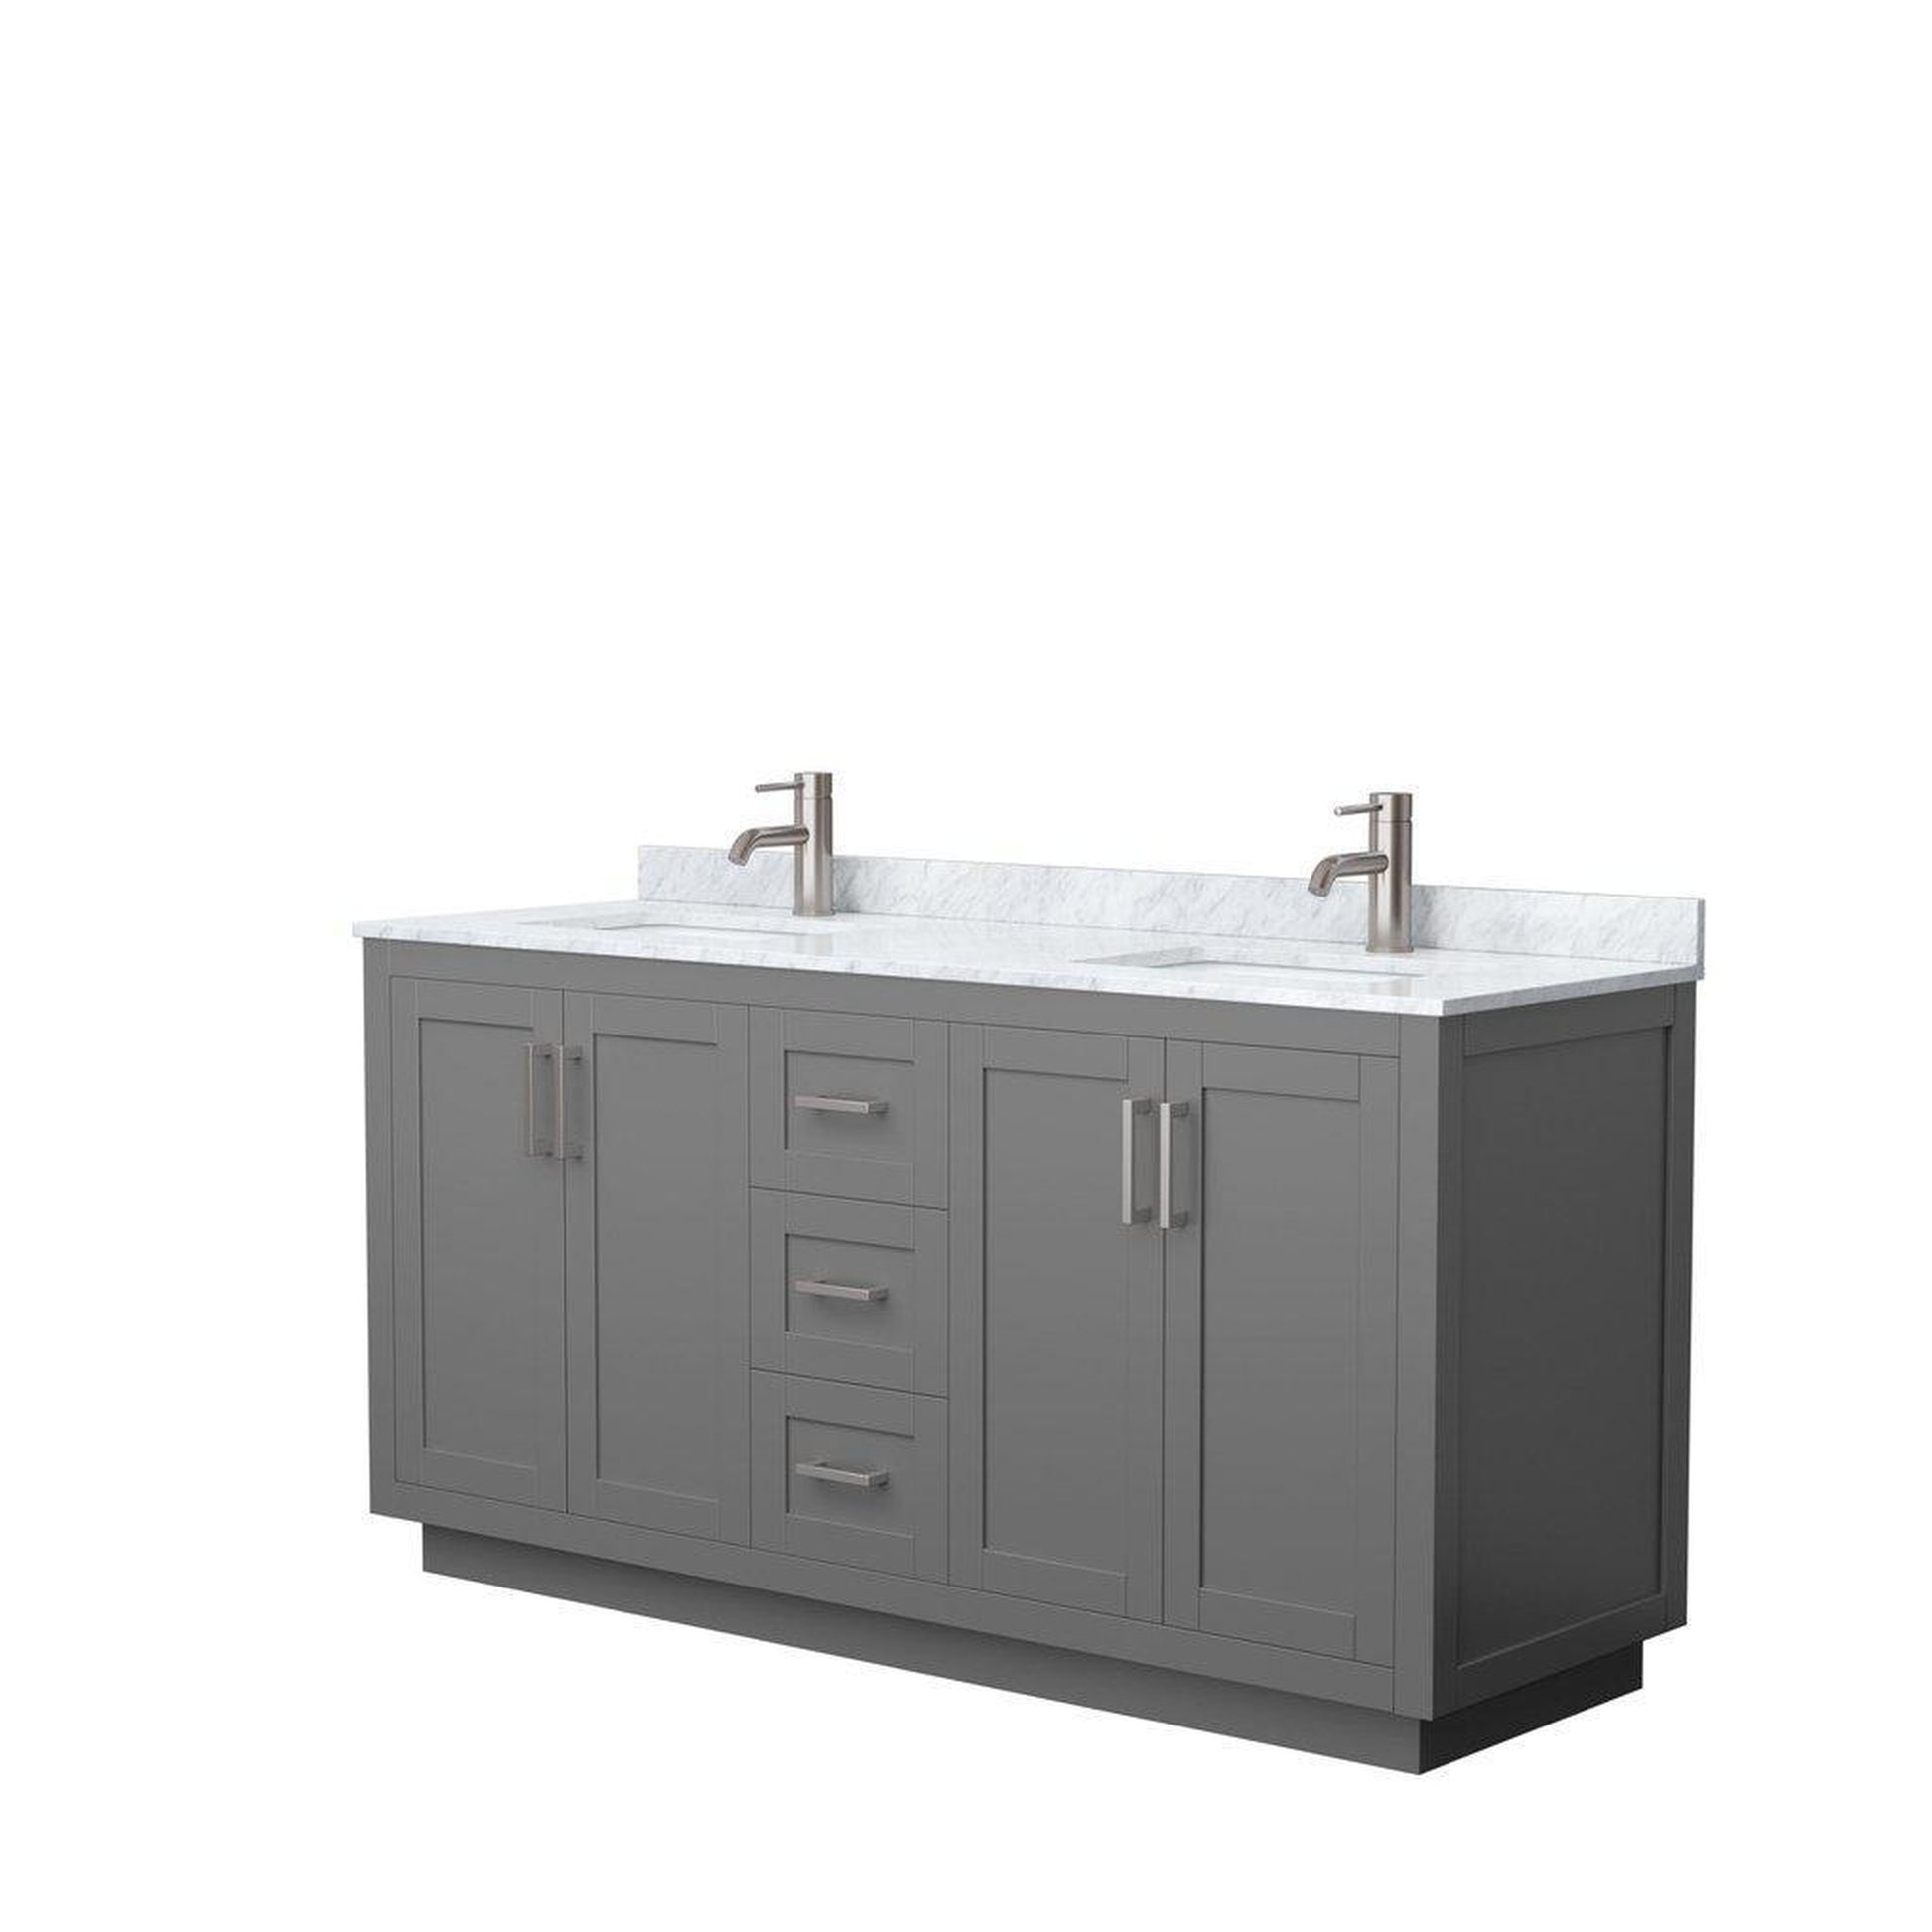 Wyndham Collection Miranda 66" Double Bathroom Dark Gray Vanity Set With White Carrara Marble Countertop, Undermount Square Sink, And Brushed Nickel Trim